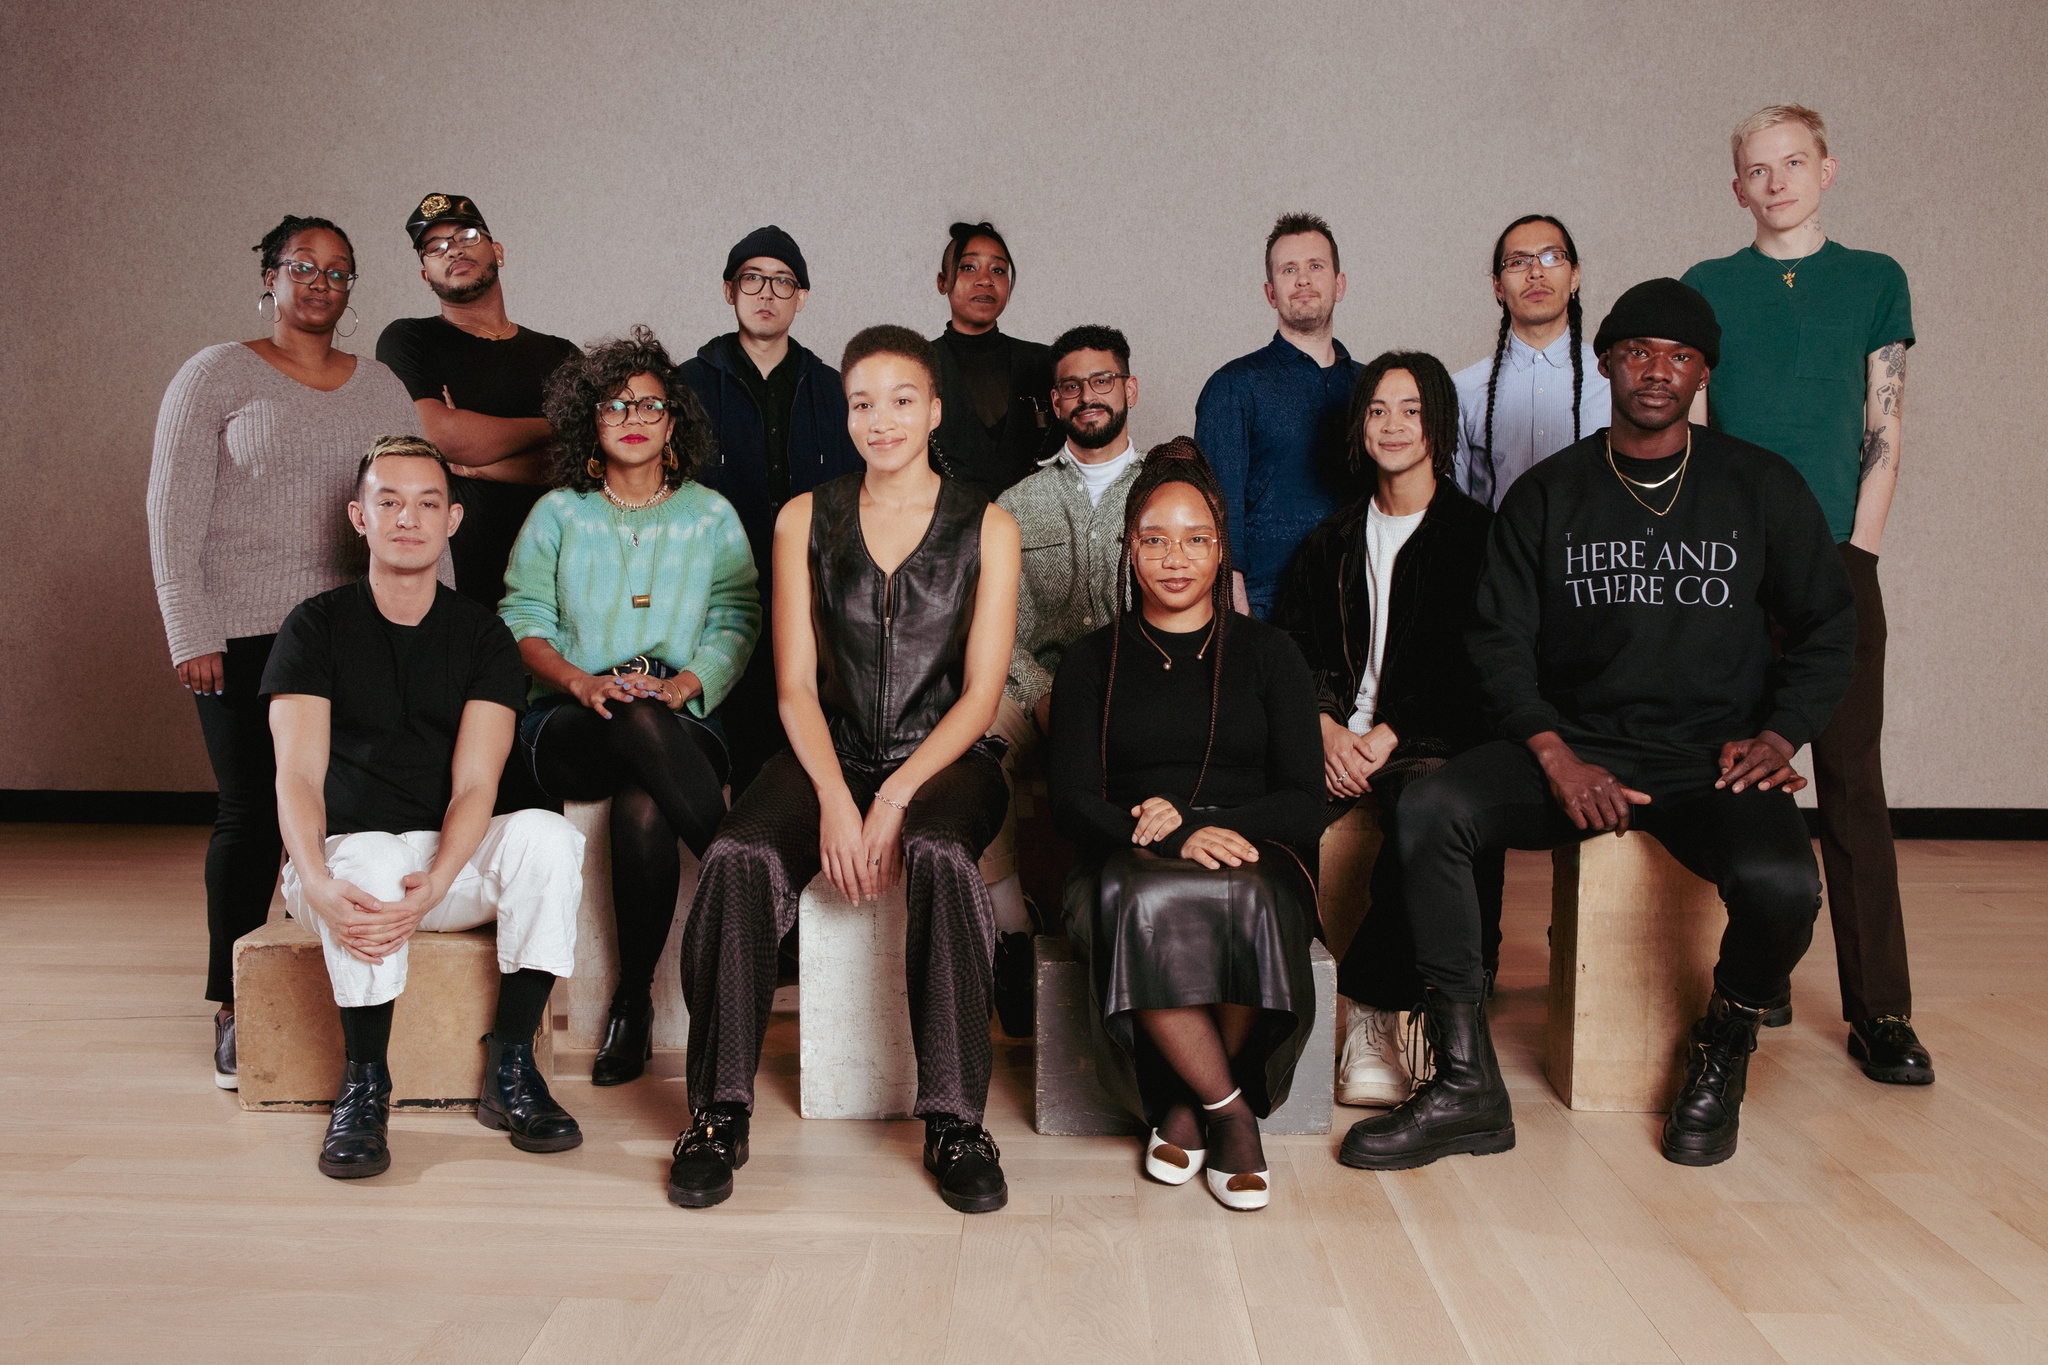 A group photo of the 2023 and 2024 Open Call artists. The artists are arranged class photo style in two rows, with one row in the back standing and the other seated in front.